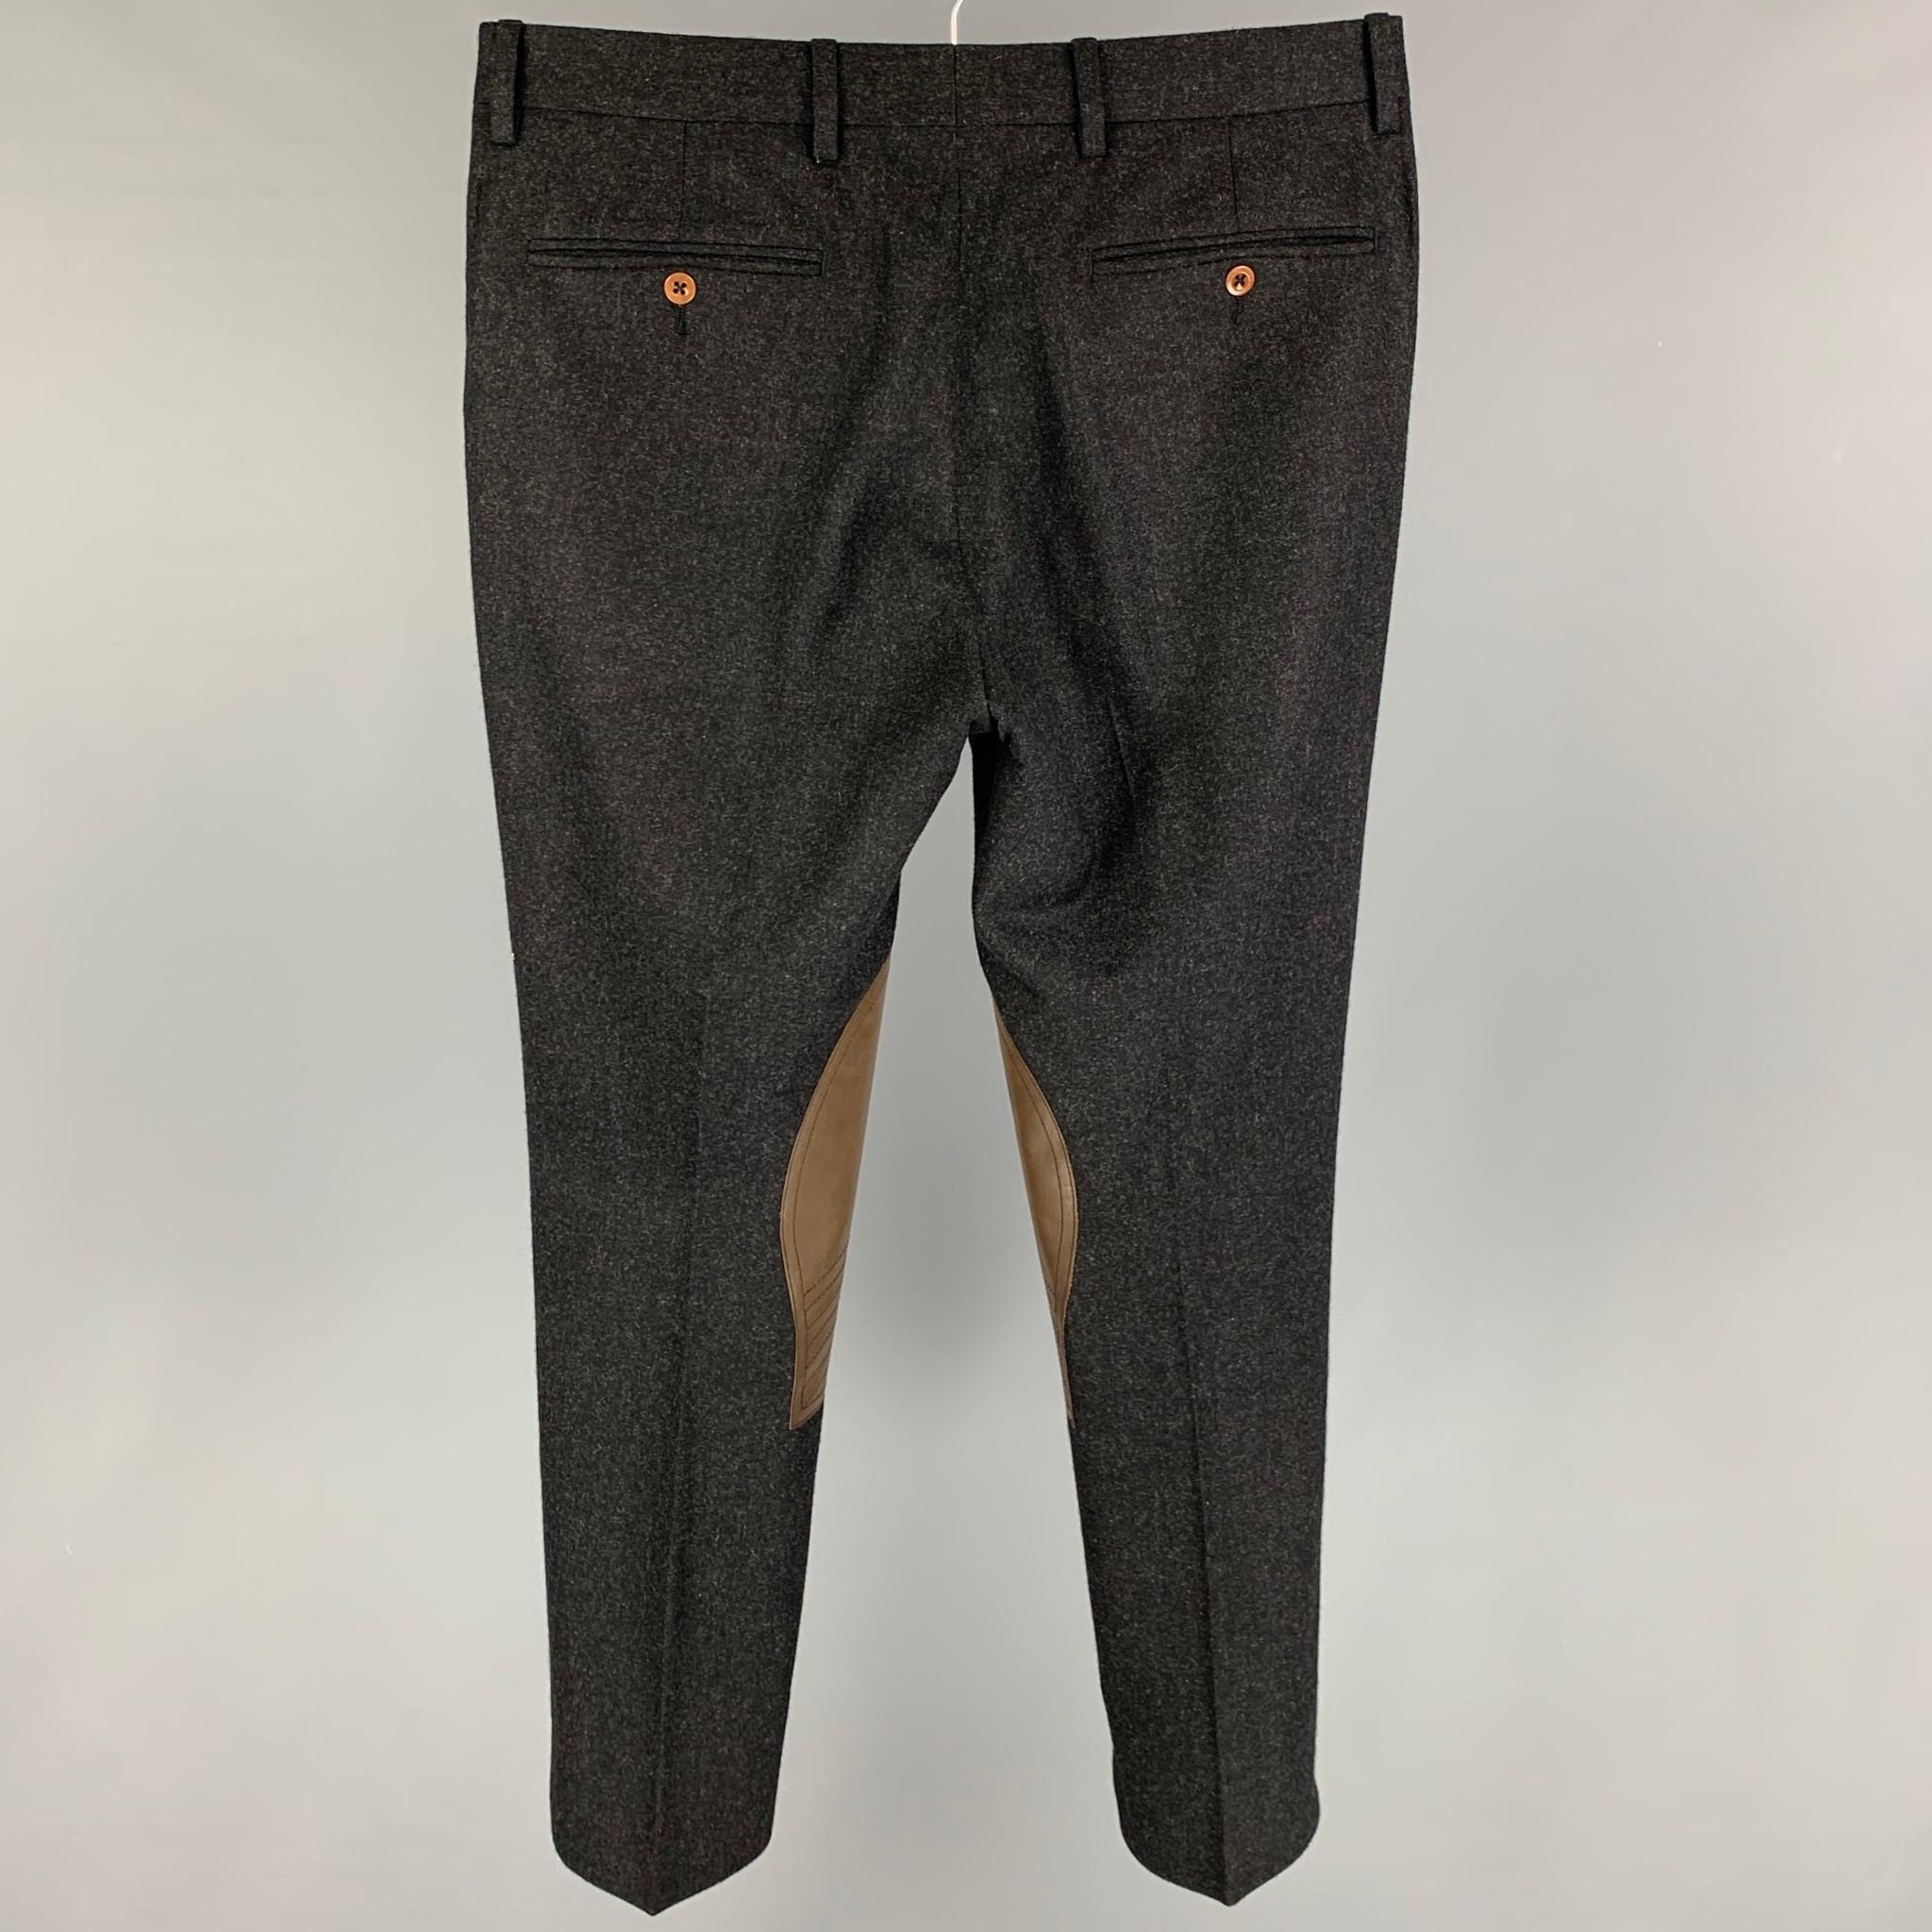 POLO by POLO RALPH LAUREN dress pants comes in a charcoal wool featuring brown leather patch details, slim fit, and a zip fly closure. 

Very Good Pre-Owned Condition.
Marked: 30

Measurements:

Waist: 32 in.
Rise: 9.5 in.
Inseam: 29 in. 